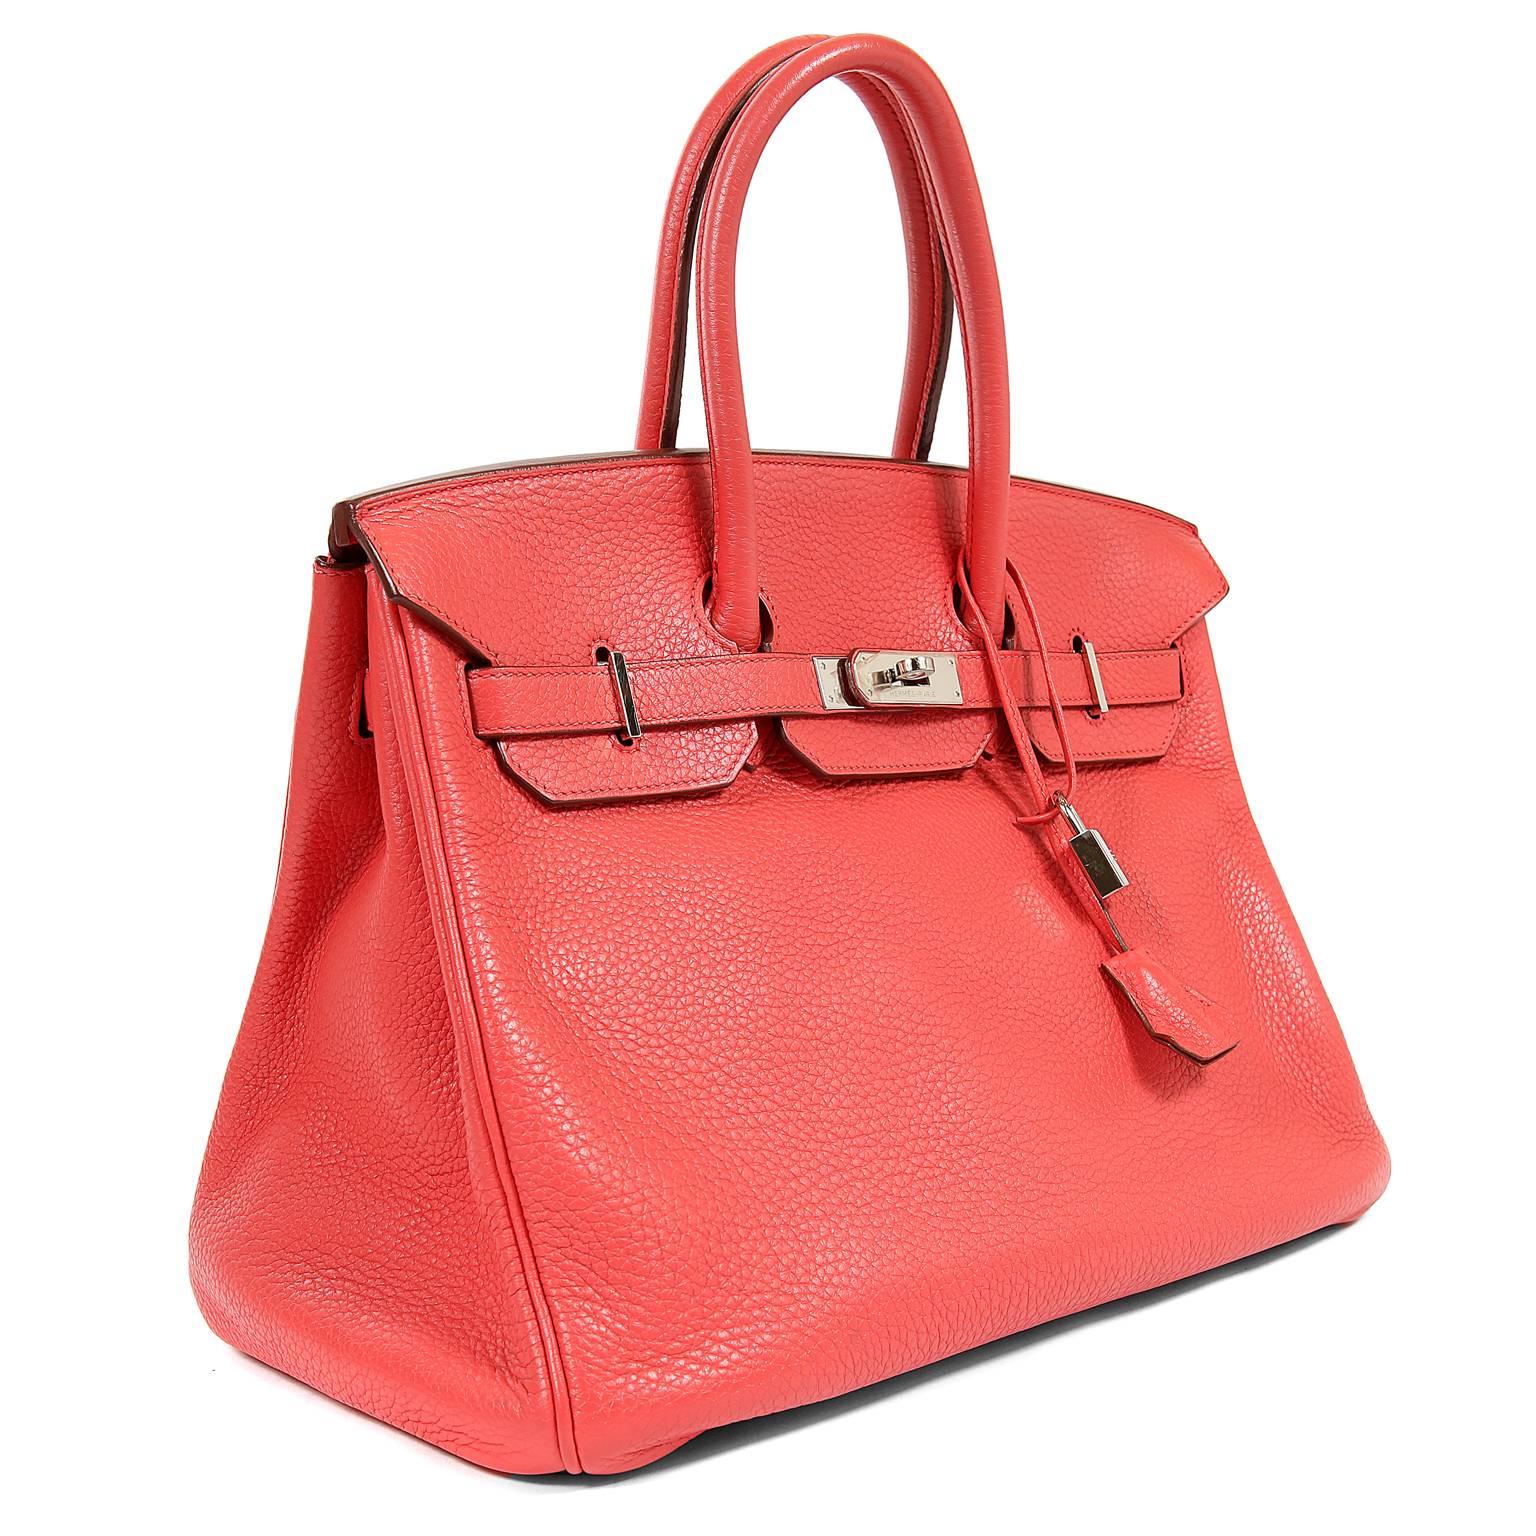 Red Hermes Bougainvillea Clemence 35 cm Birkin Bag with PHW For Sale